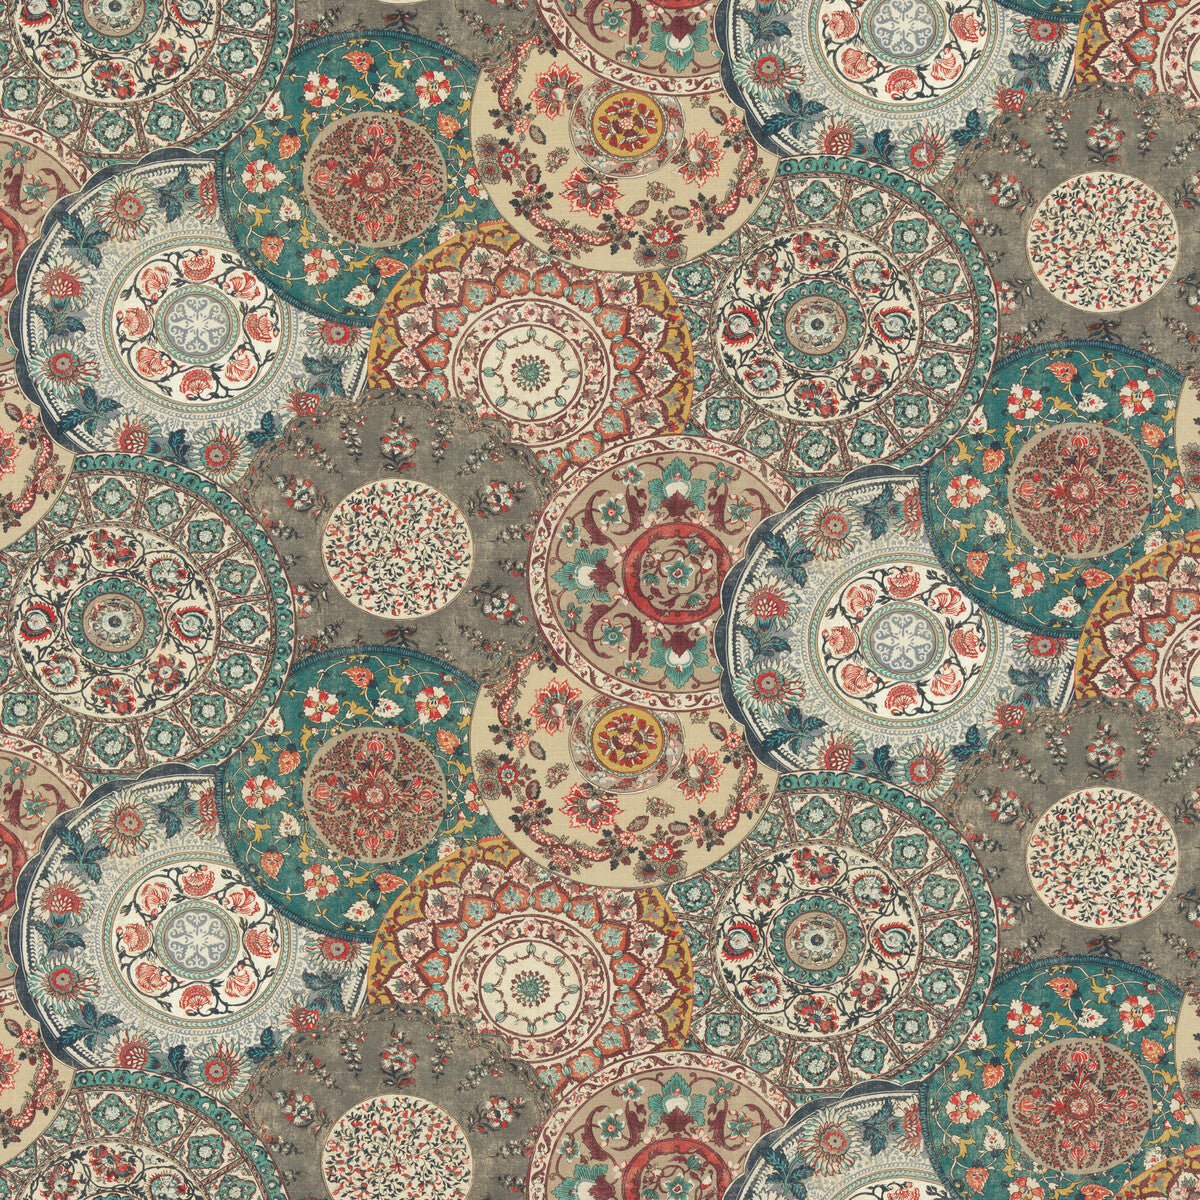 Imari fabric in teal color - pattern BP10856.3.0 - by G P &amp; J Baker in the Chifu collection